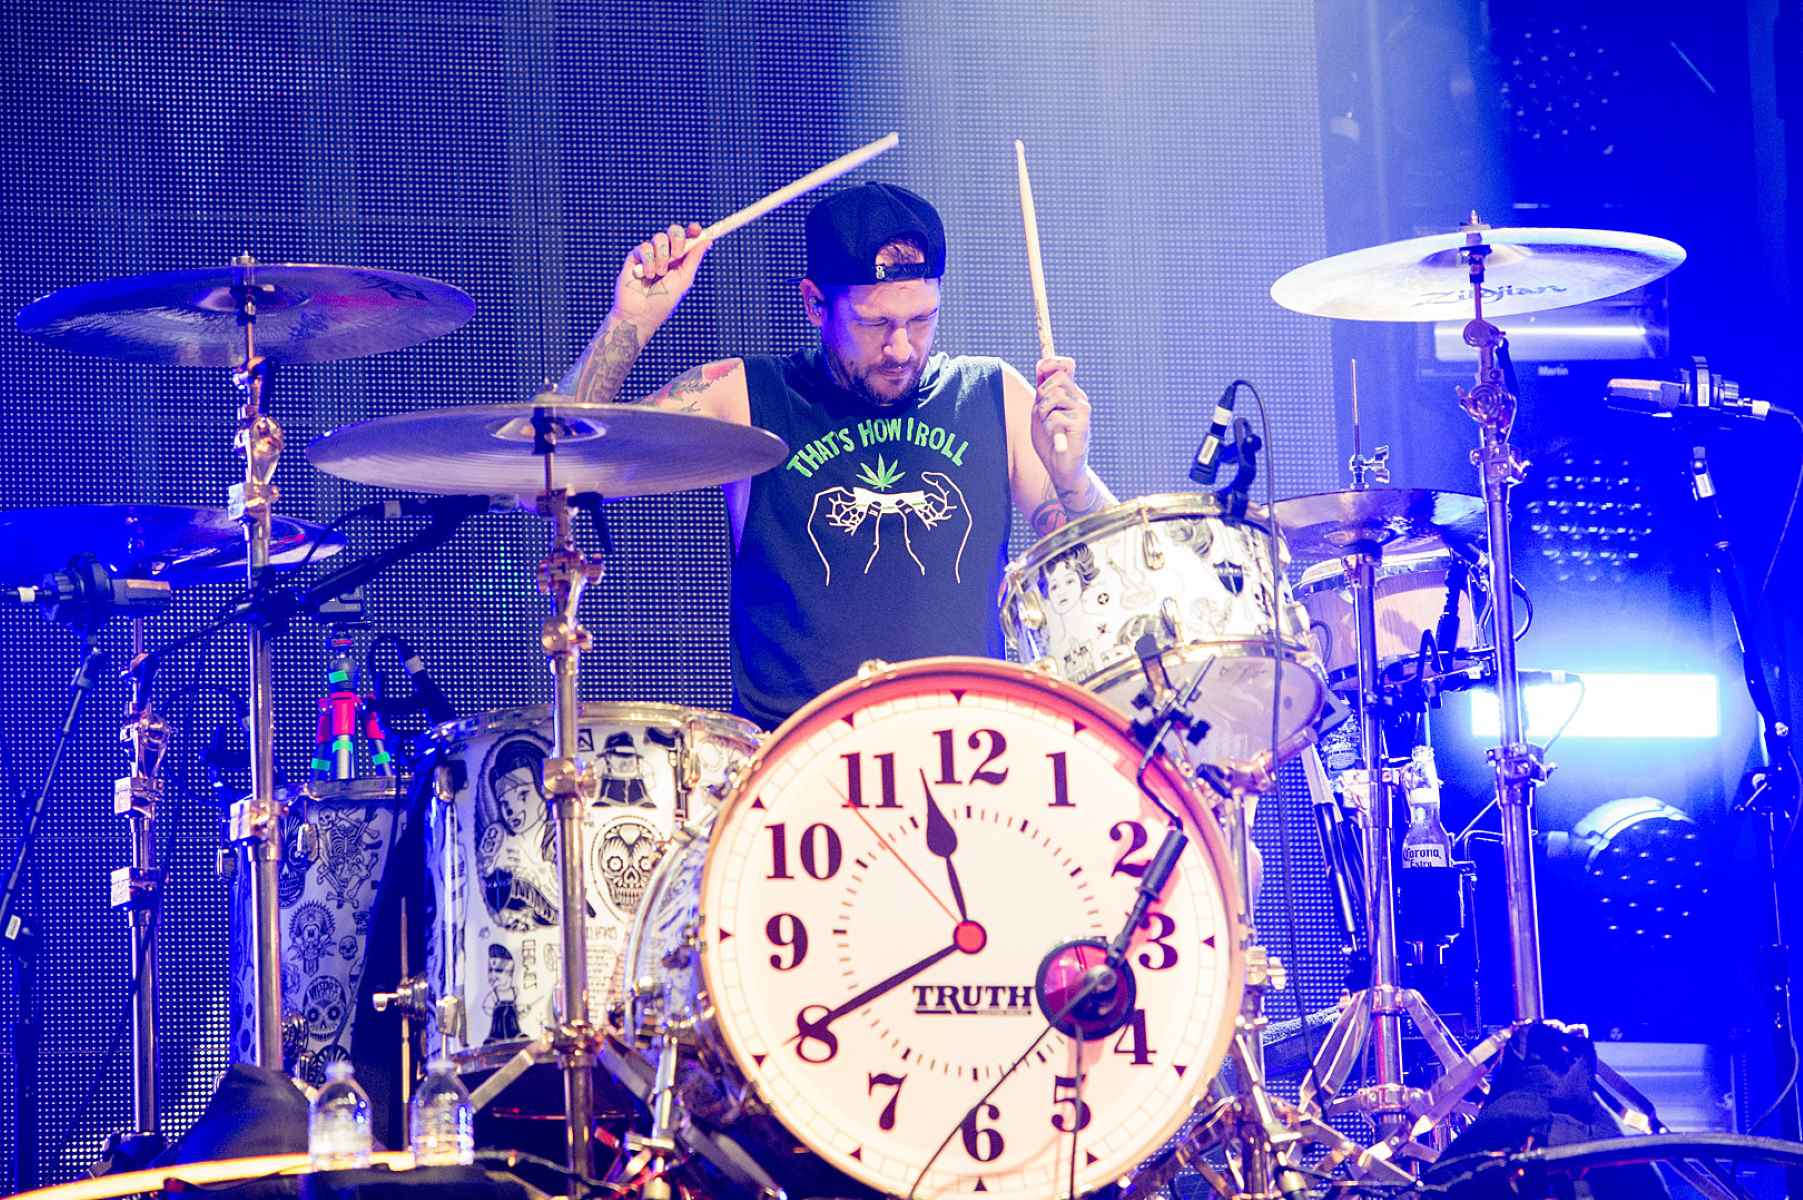 Who Plays Drums For Pierce The Veil